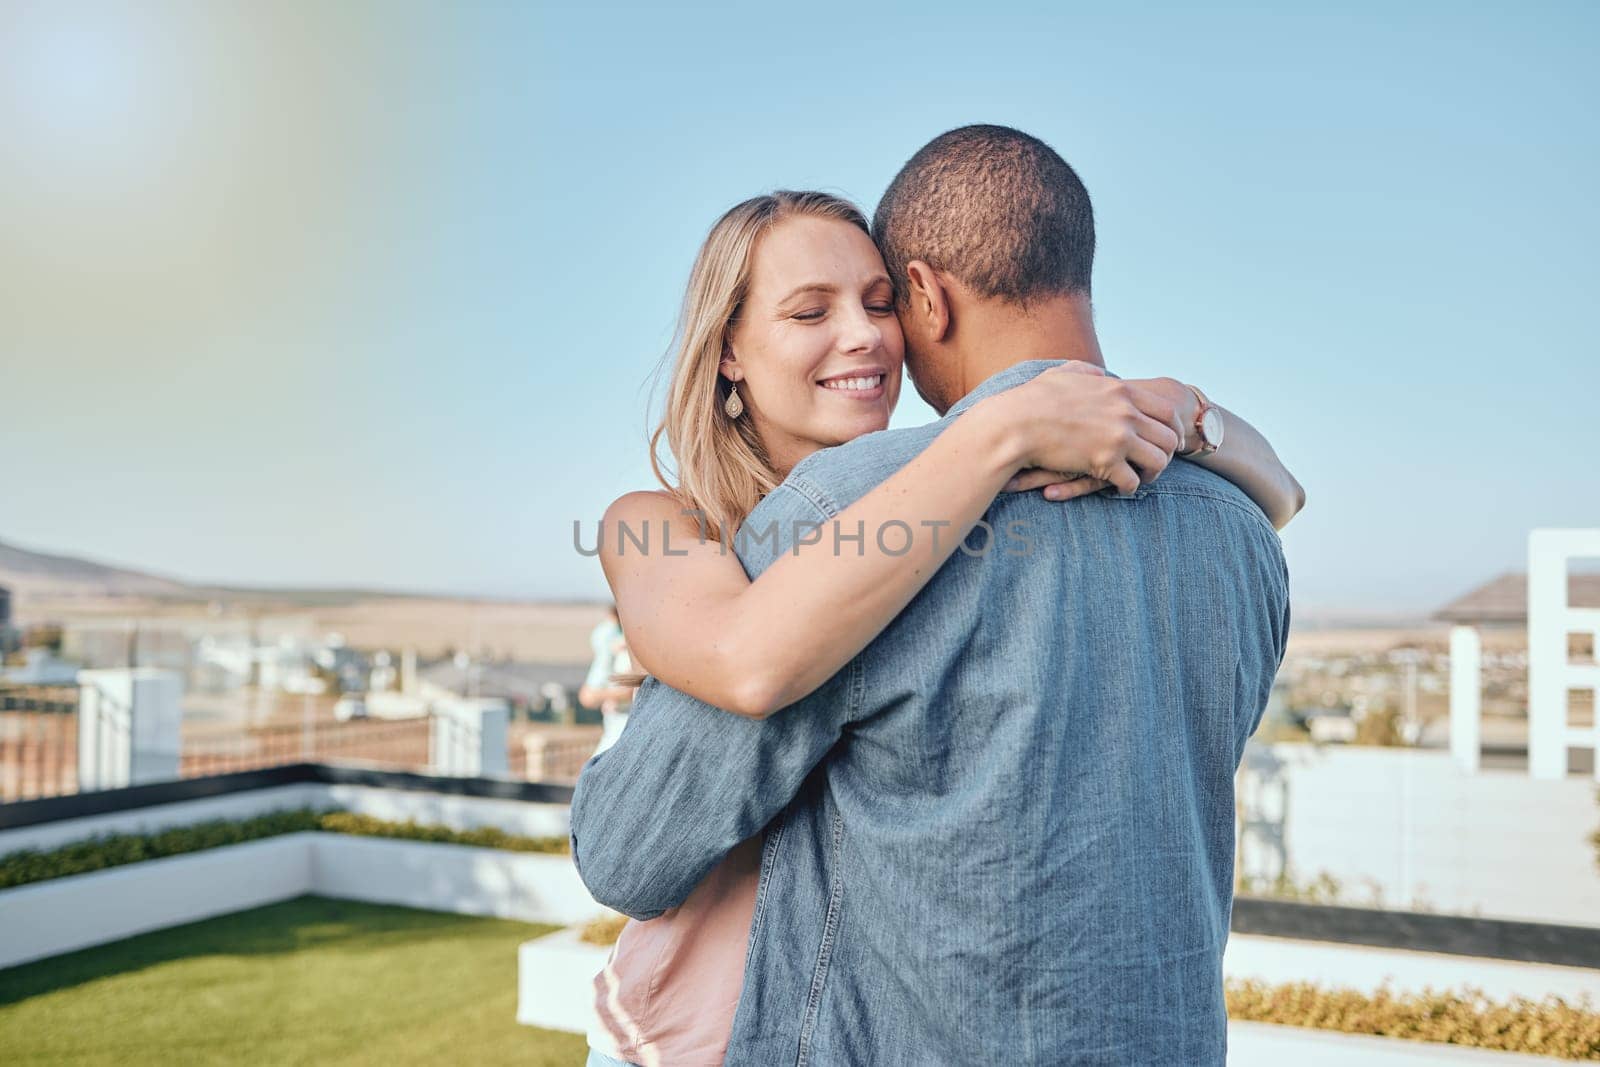 Couple, love and hug on city building rooftop for date, romance and quality time while dancing and happy together. Interracial man and woman on vacation in Cape town in summer for cityscape travel.